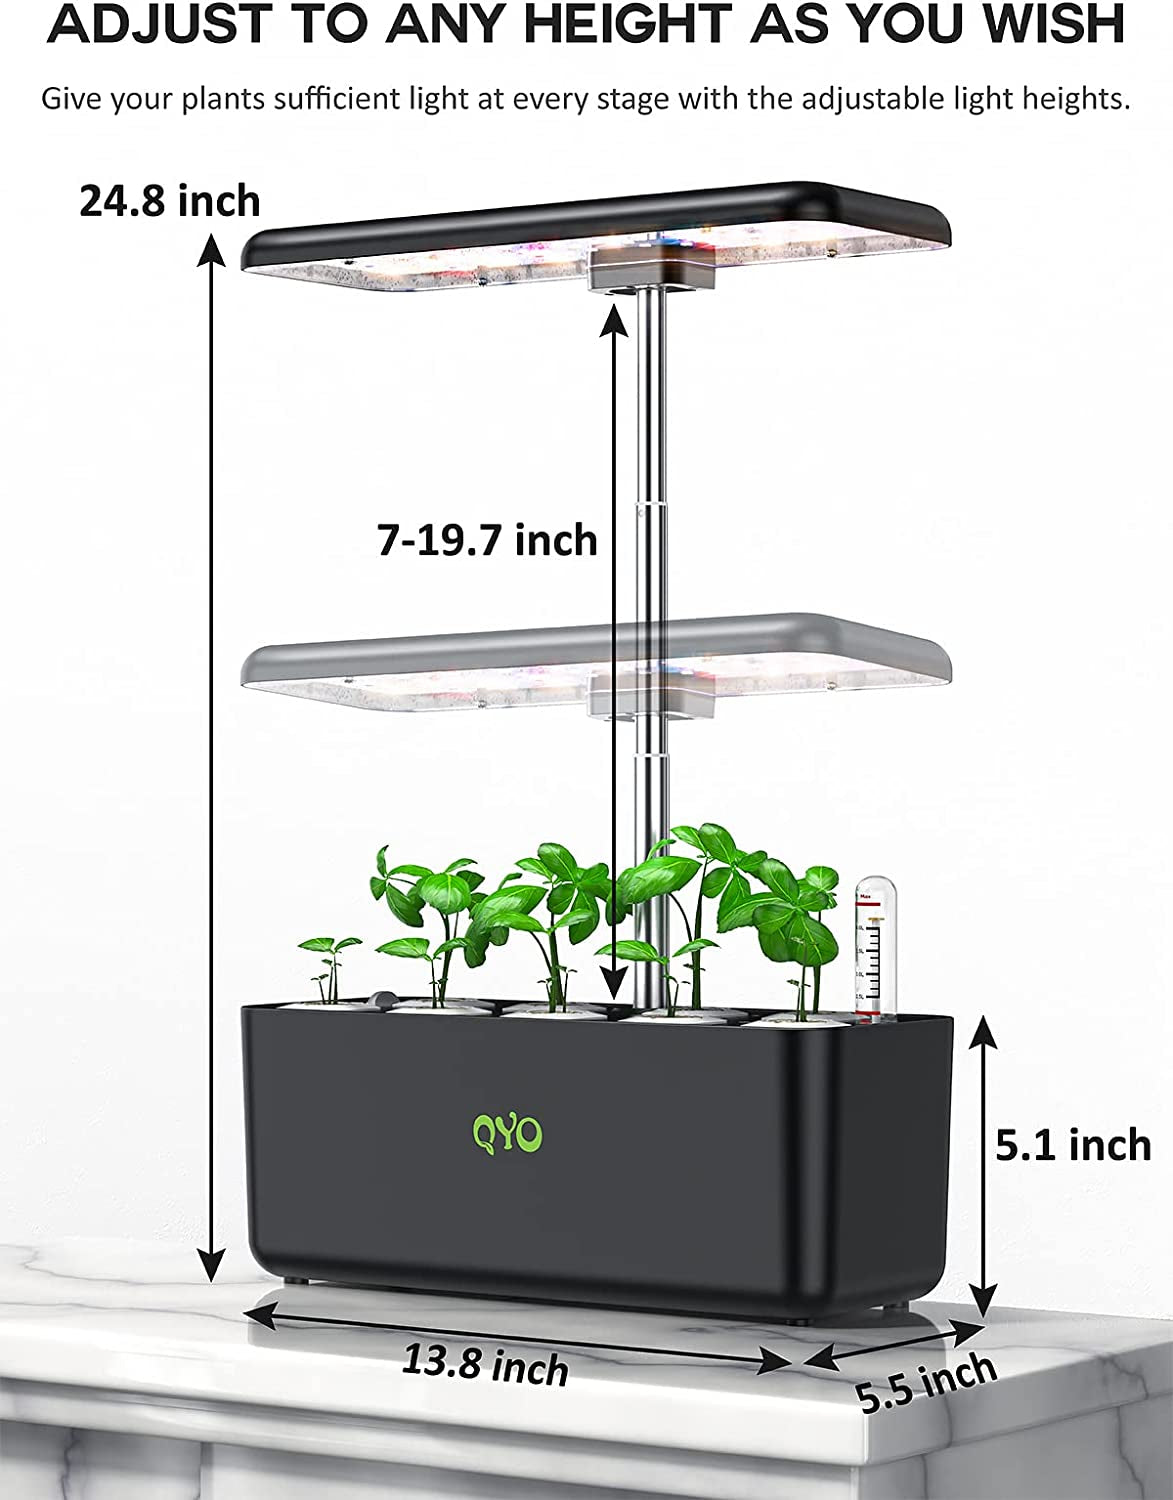 Hydroponics Growing System,  9 Pods Herb Garden with 70 Leds Full-Spectrum Plant Grow Light, Hydroponic Herb Garden with 4.5L Water Tank, 19.7'' Height Adjustable Gardening System, Black, 10